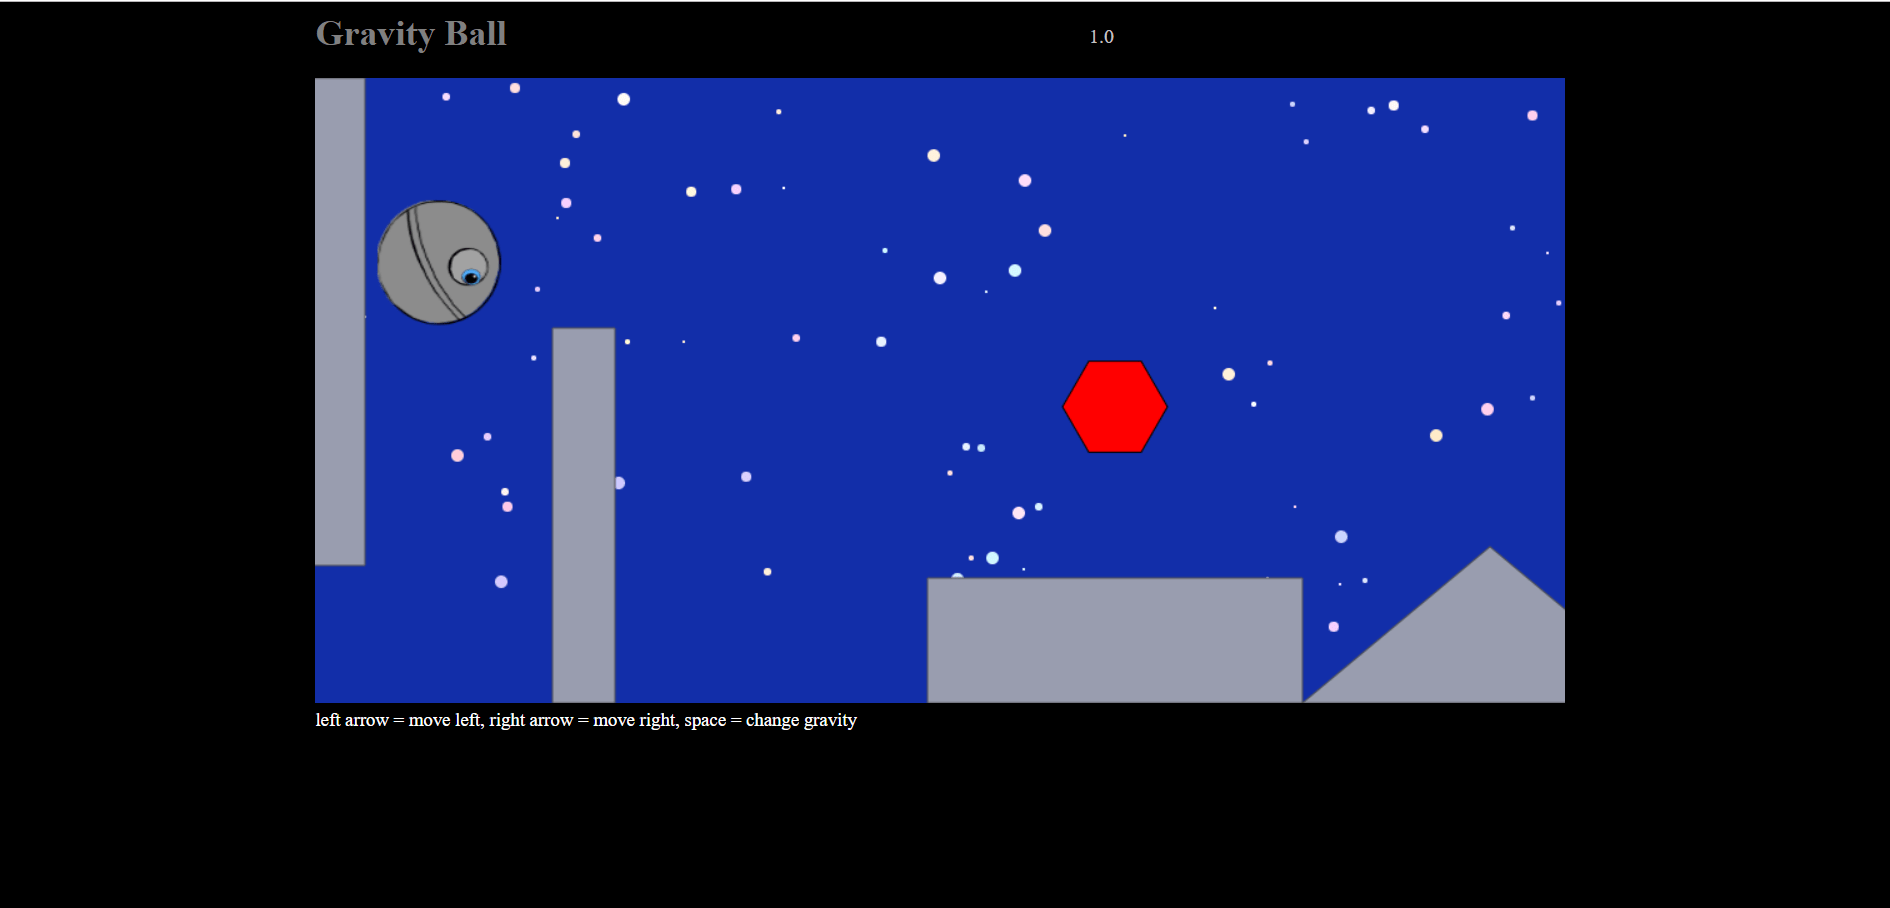 Screenshot 92 - GRAVITY BALL GAME IN JAVASCRIPT WITH SOURCE CODE